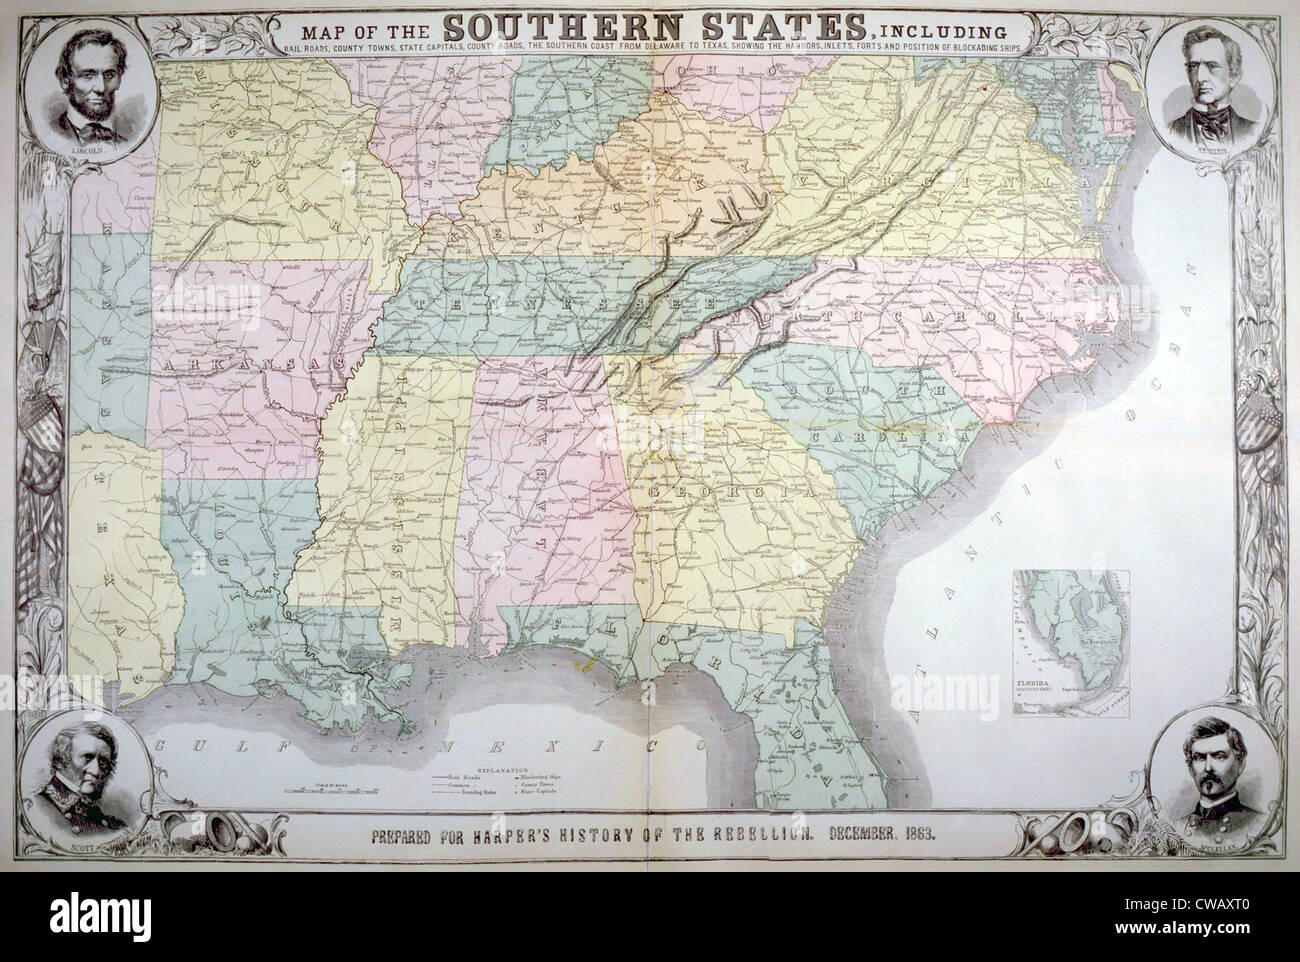 Map of the southern states published for Harper's Pictorial History of the Great Rebellion, December 1863 Stock Photo